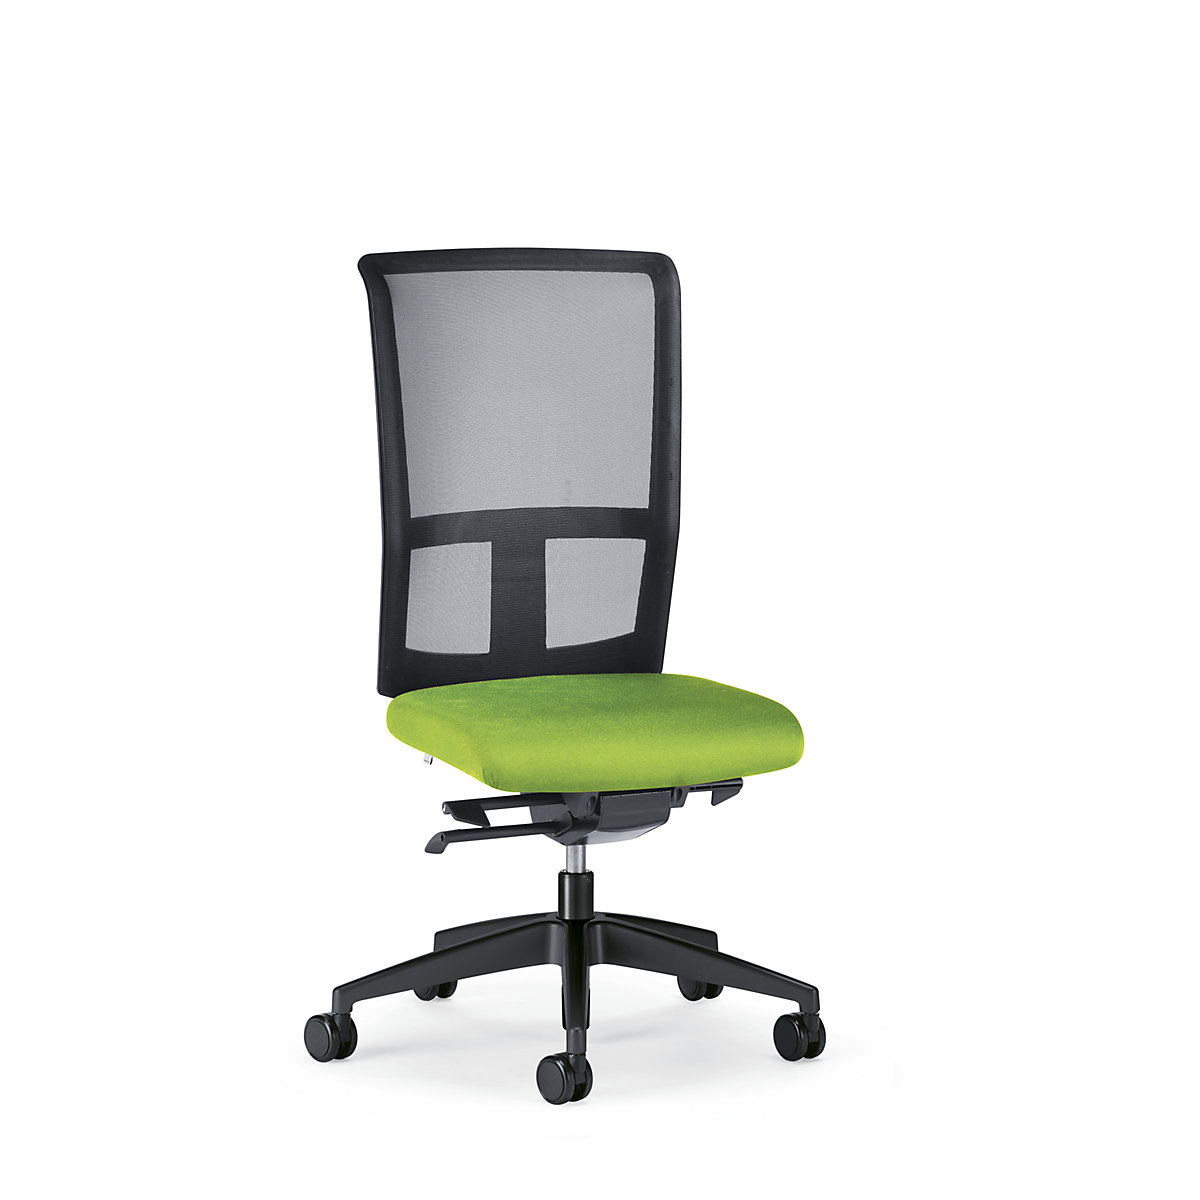 GOAL AIR office swivel chair, back rest height 545 mm – interstuhl, black frame, with soft castors, yellow green, seat depth 410 mm-3